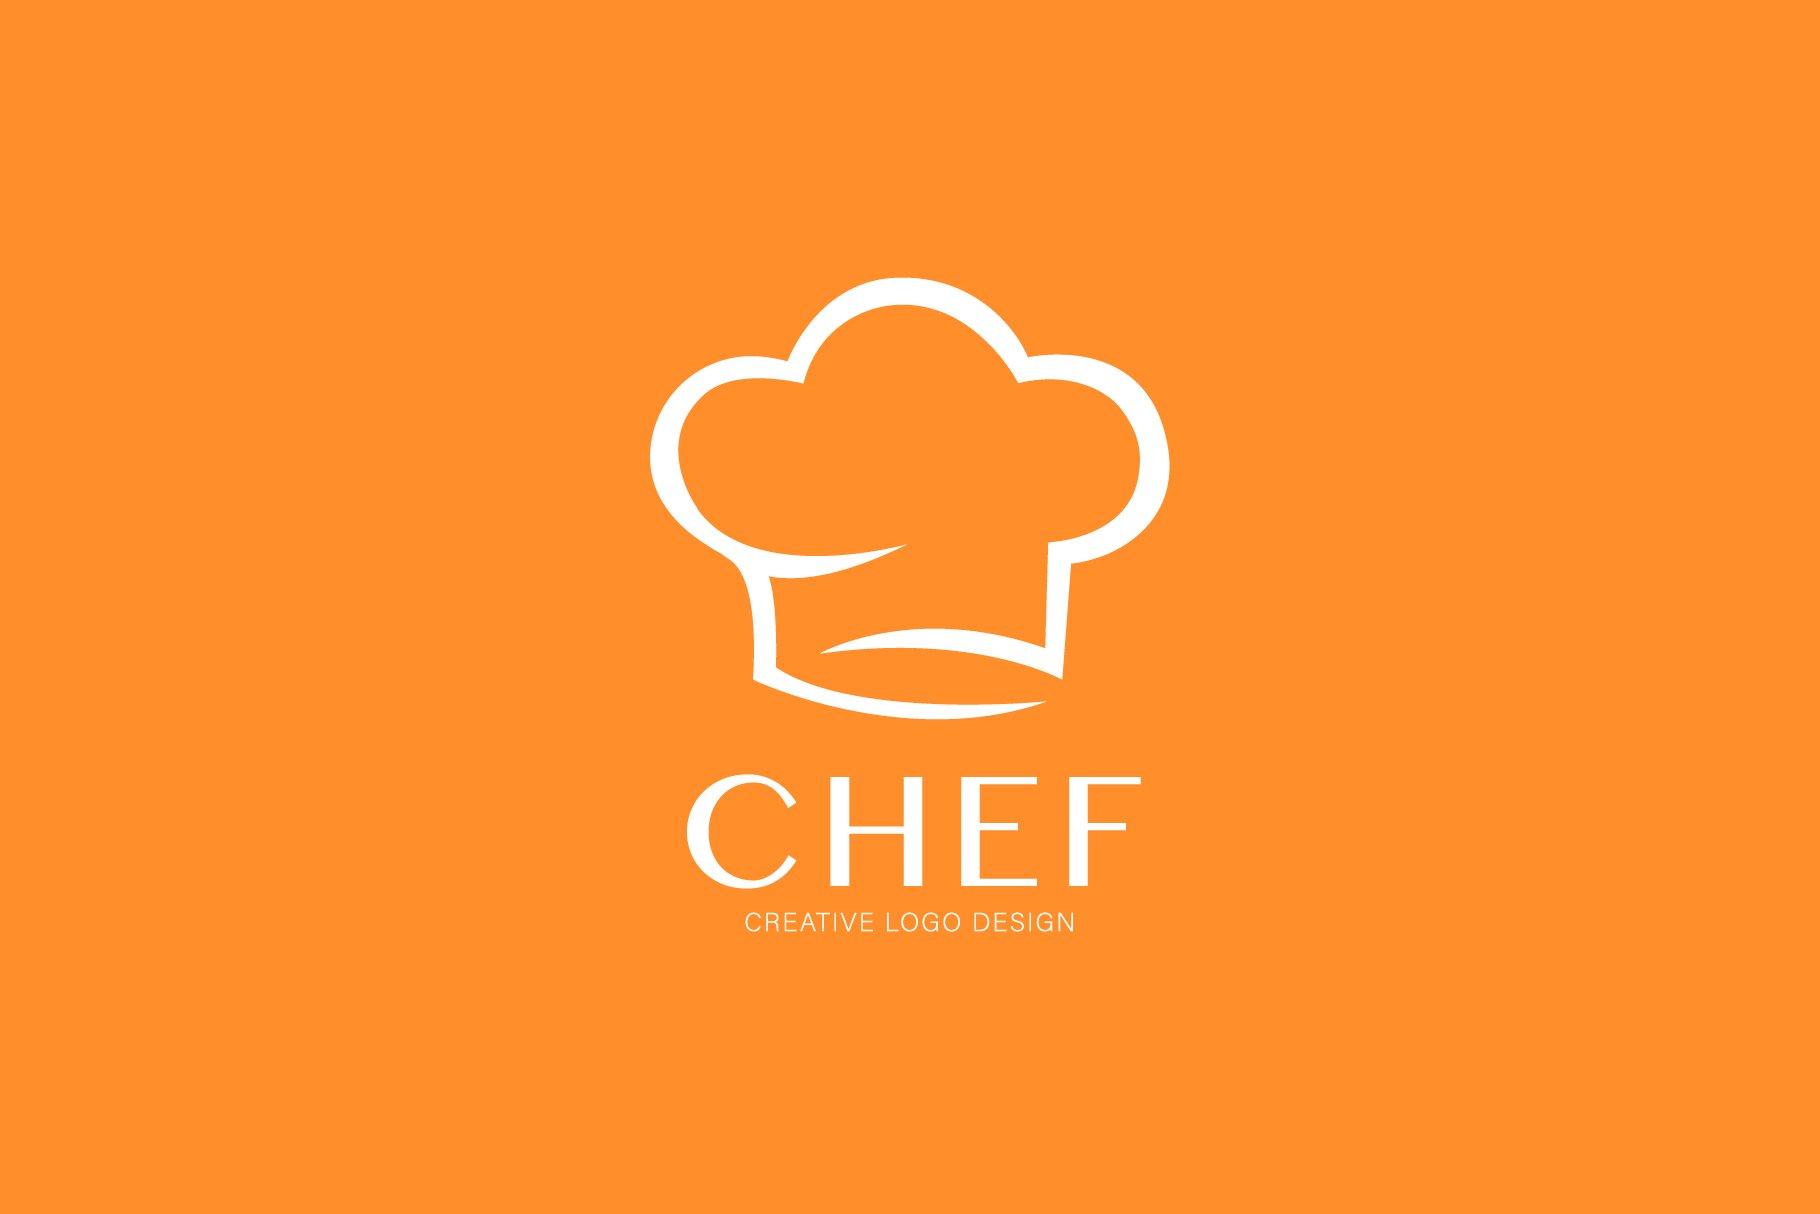 White logo for food business on the orange background.